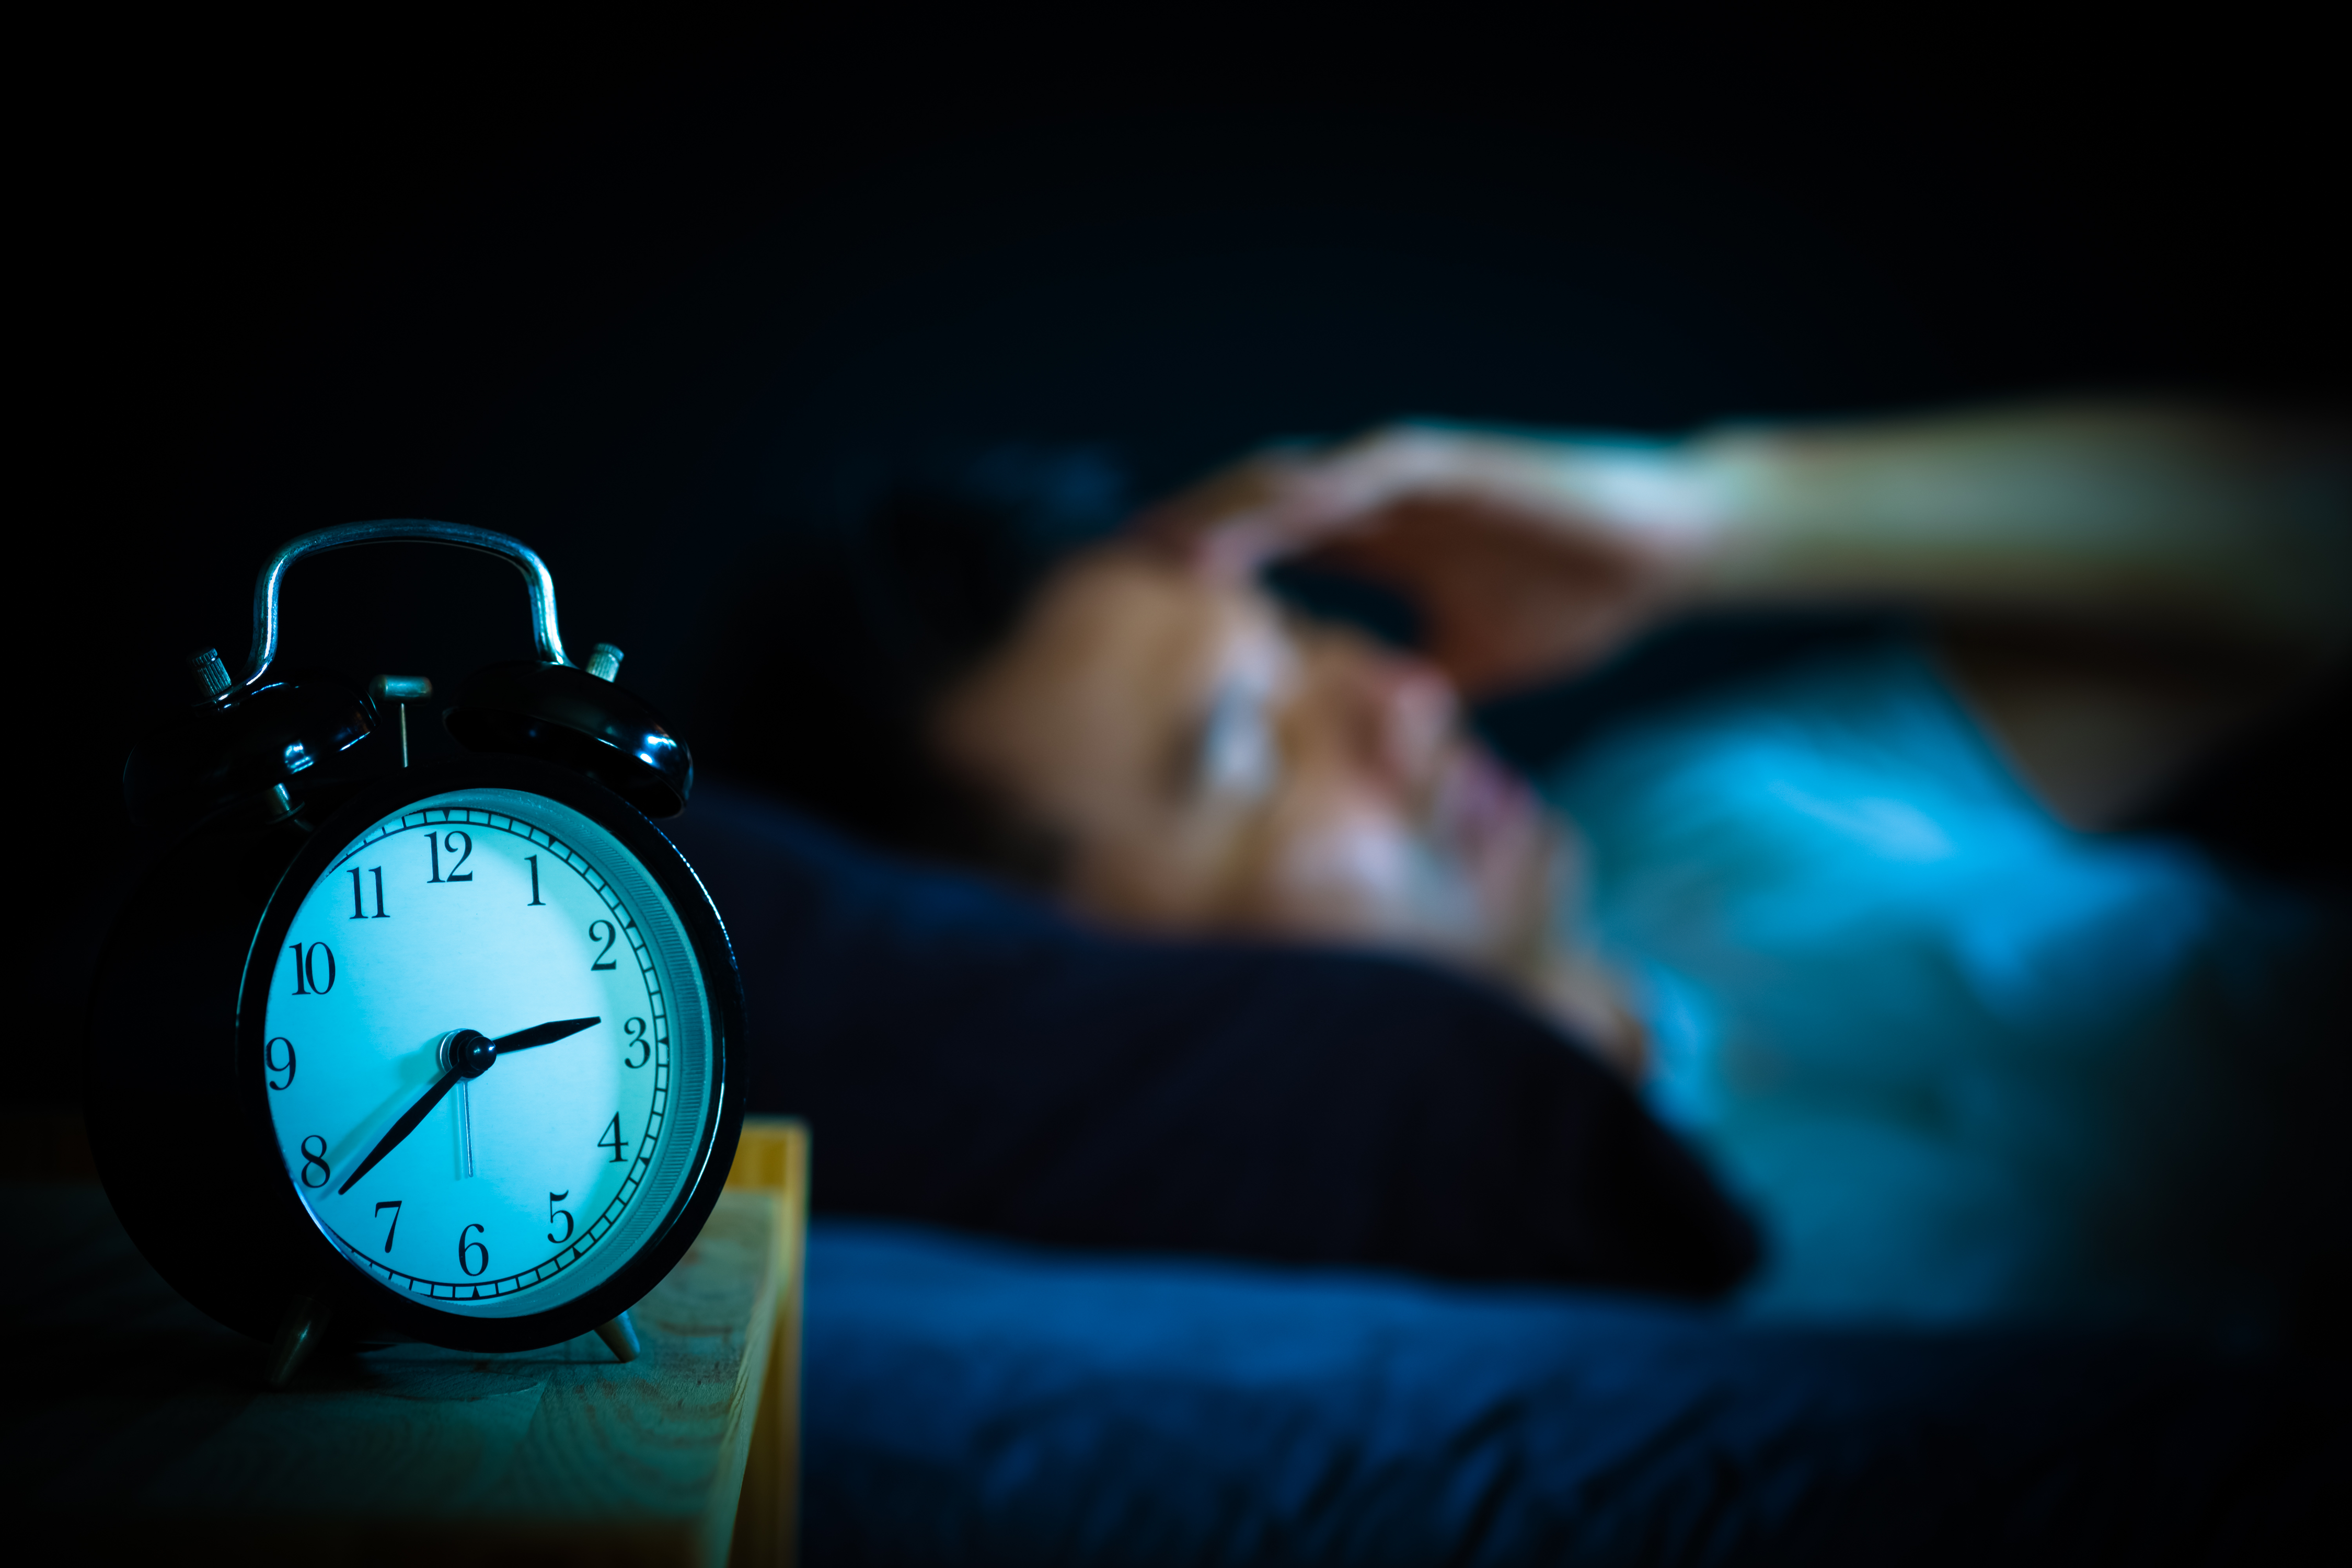 NEWSLINE: Data shows Americans logging more sleep now than in last 20 years